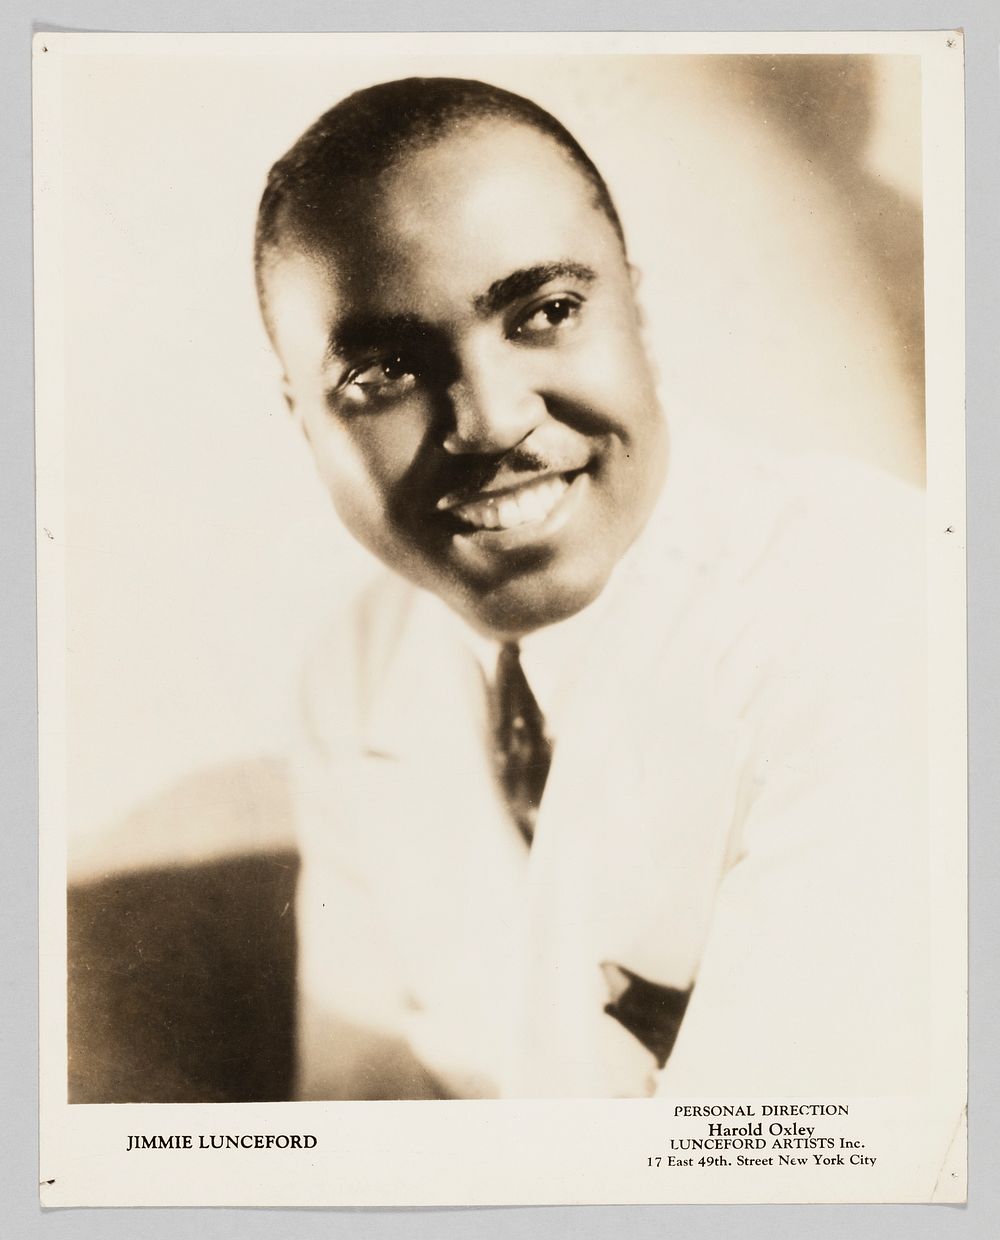 Photograph of Jimmie Lunceford, National Museum of African American History and Culture